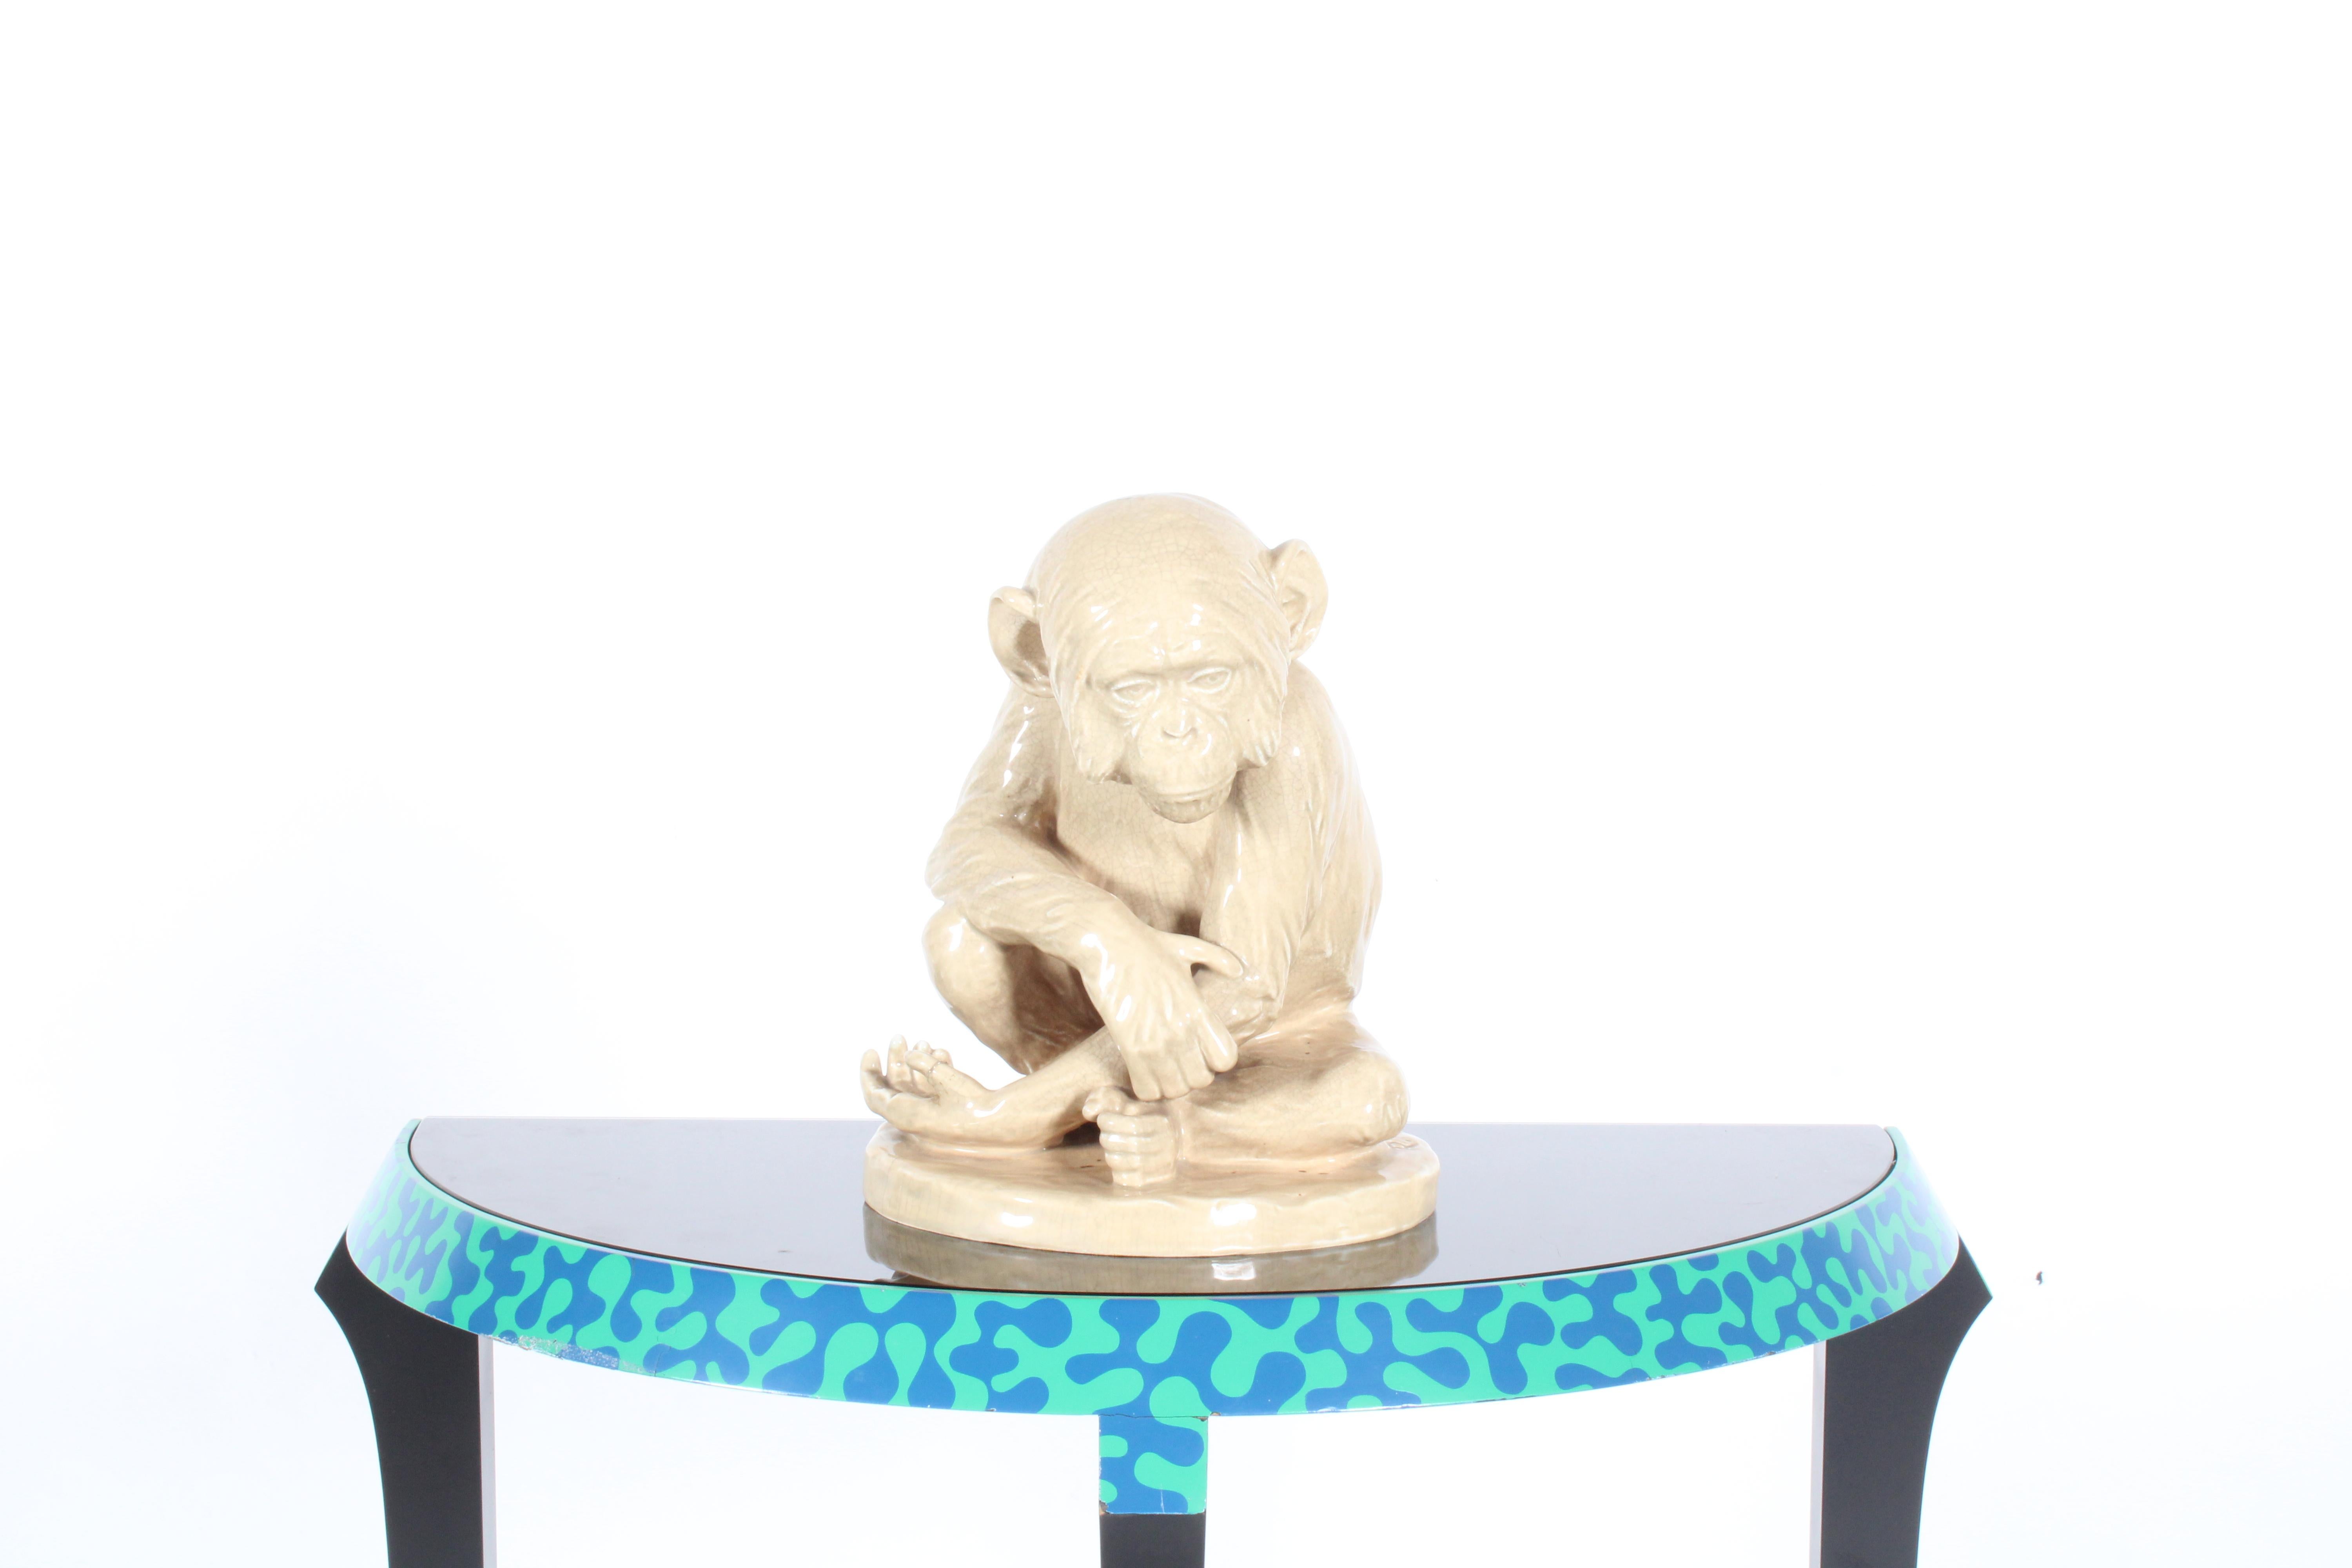 Glazed Charming Vintage Ceramic In The Form Of A Chimpanzee  *Free Worldwide Shipping